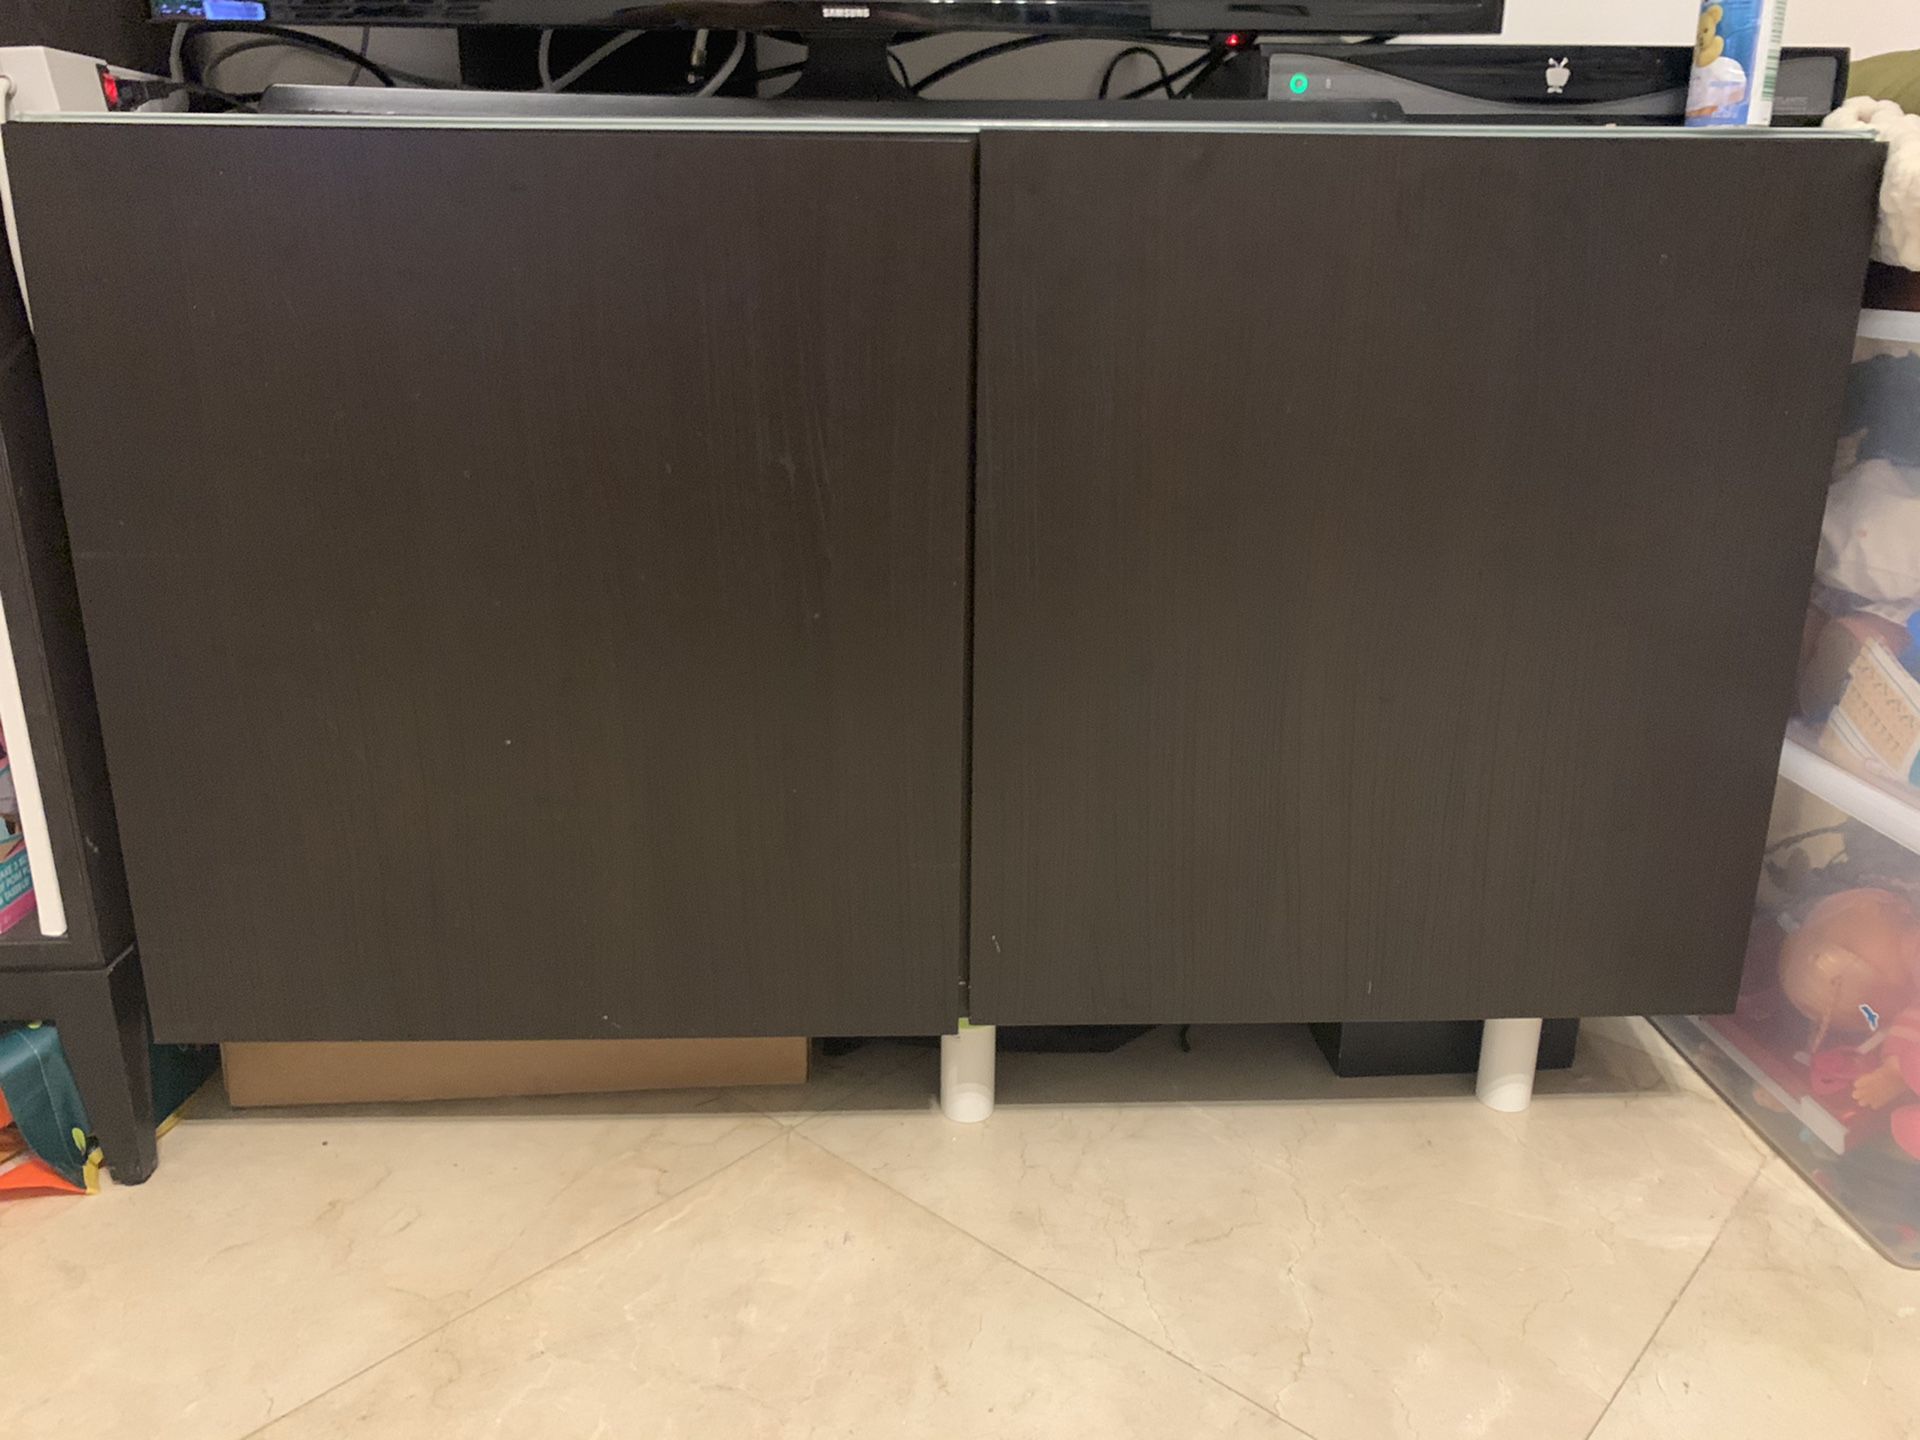 TV stand unit with doors, storage